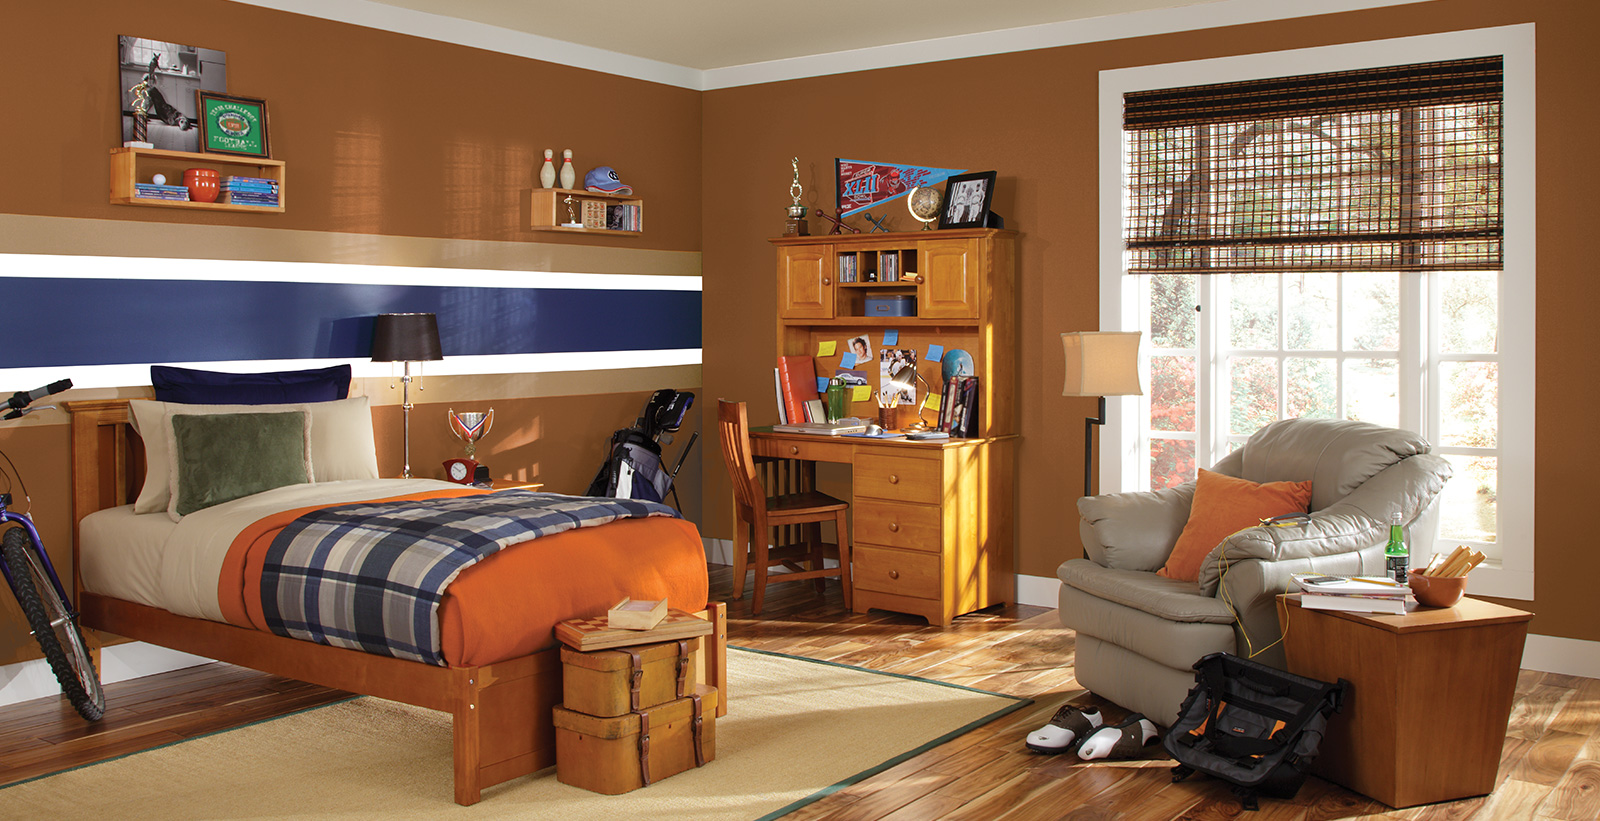 Sporty styled youth room with orange, blue, white, and brown horizontal striped walls, white on the trim, wooden desk with sports memorabilia, and a wooden bed.